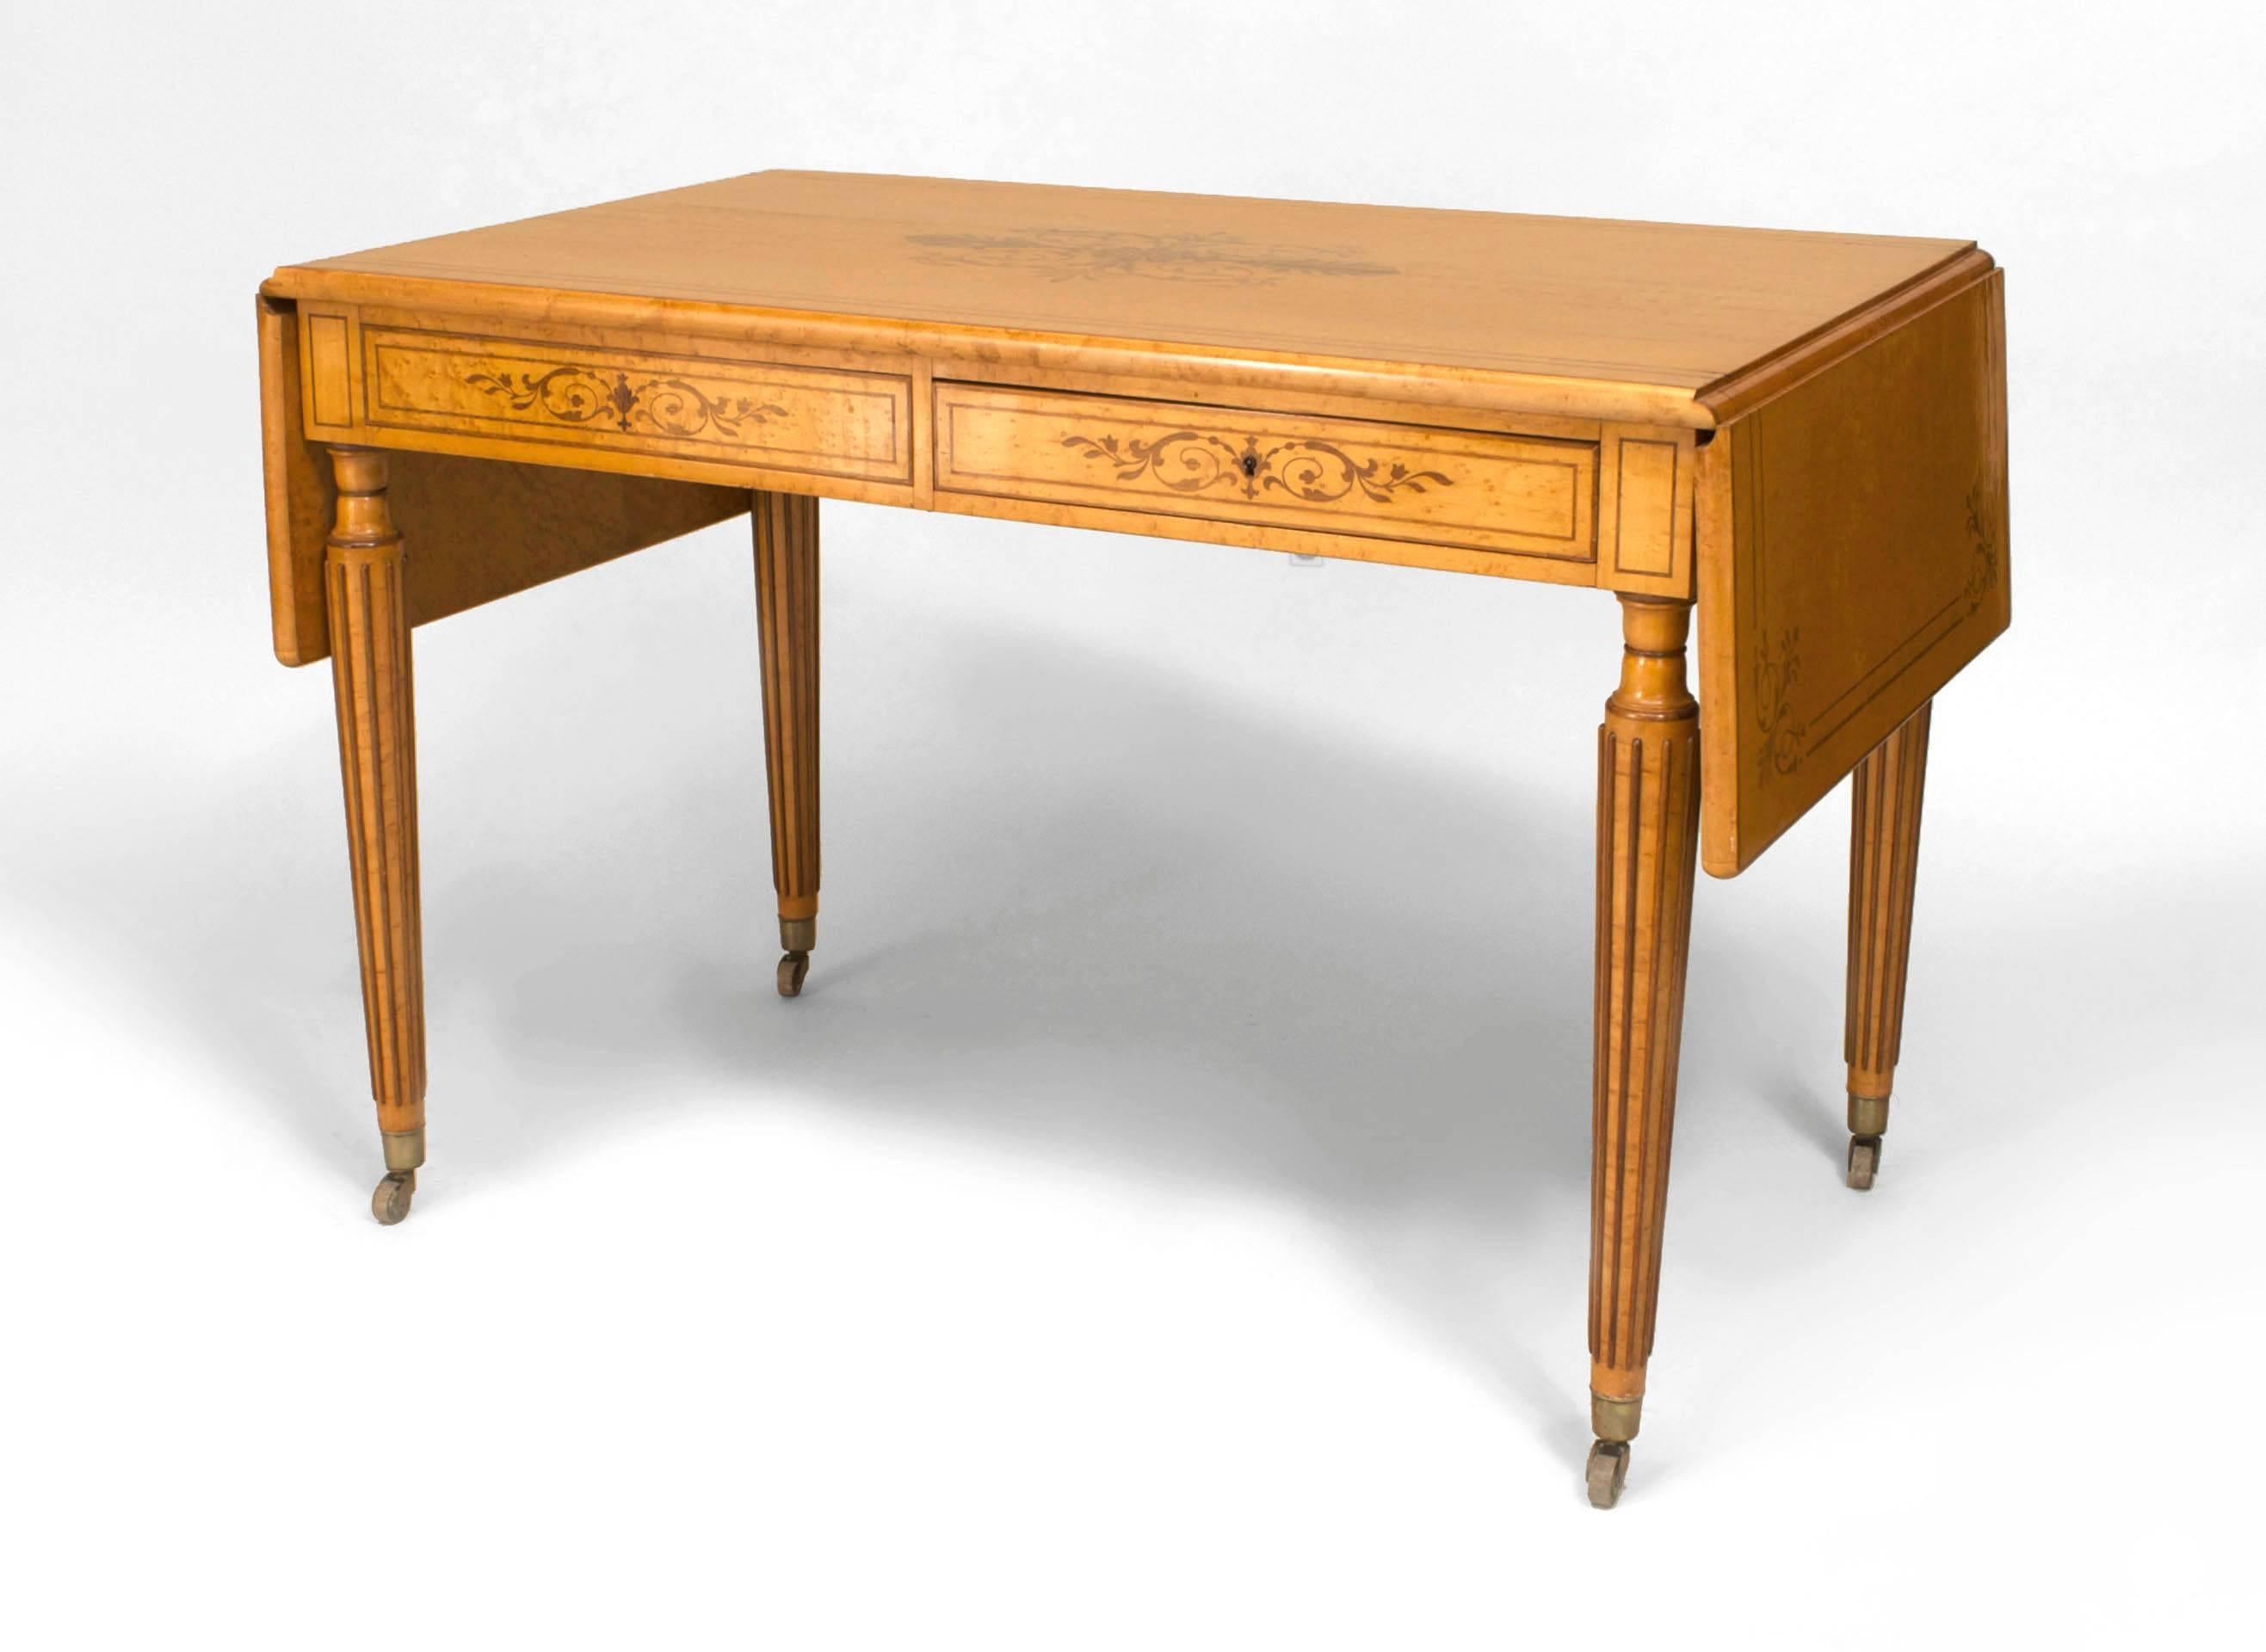 French Charles X Birdseye maple davenport table desk with amaranth marquetry inlaid top & drop sides supported on 4 tapered fluted legs with a single drawer on front & back.
